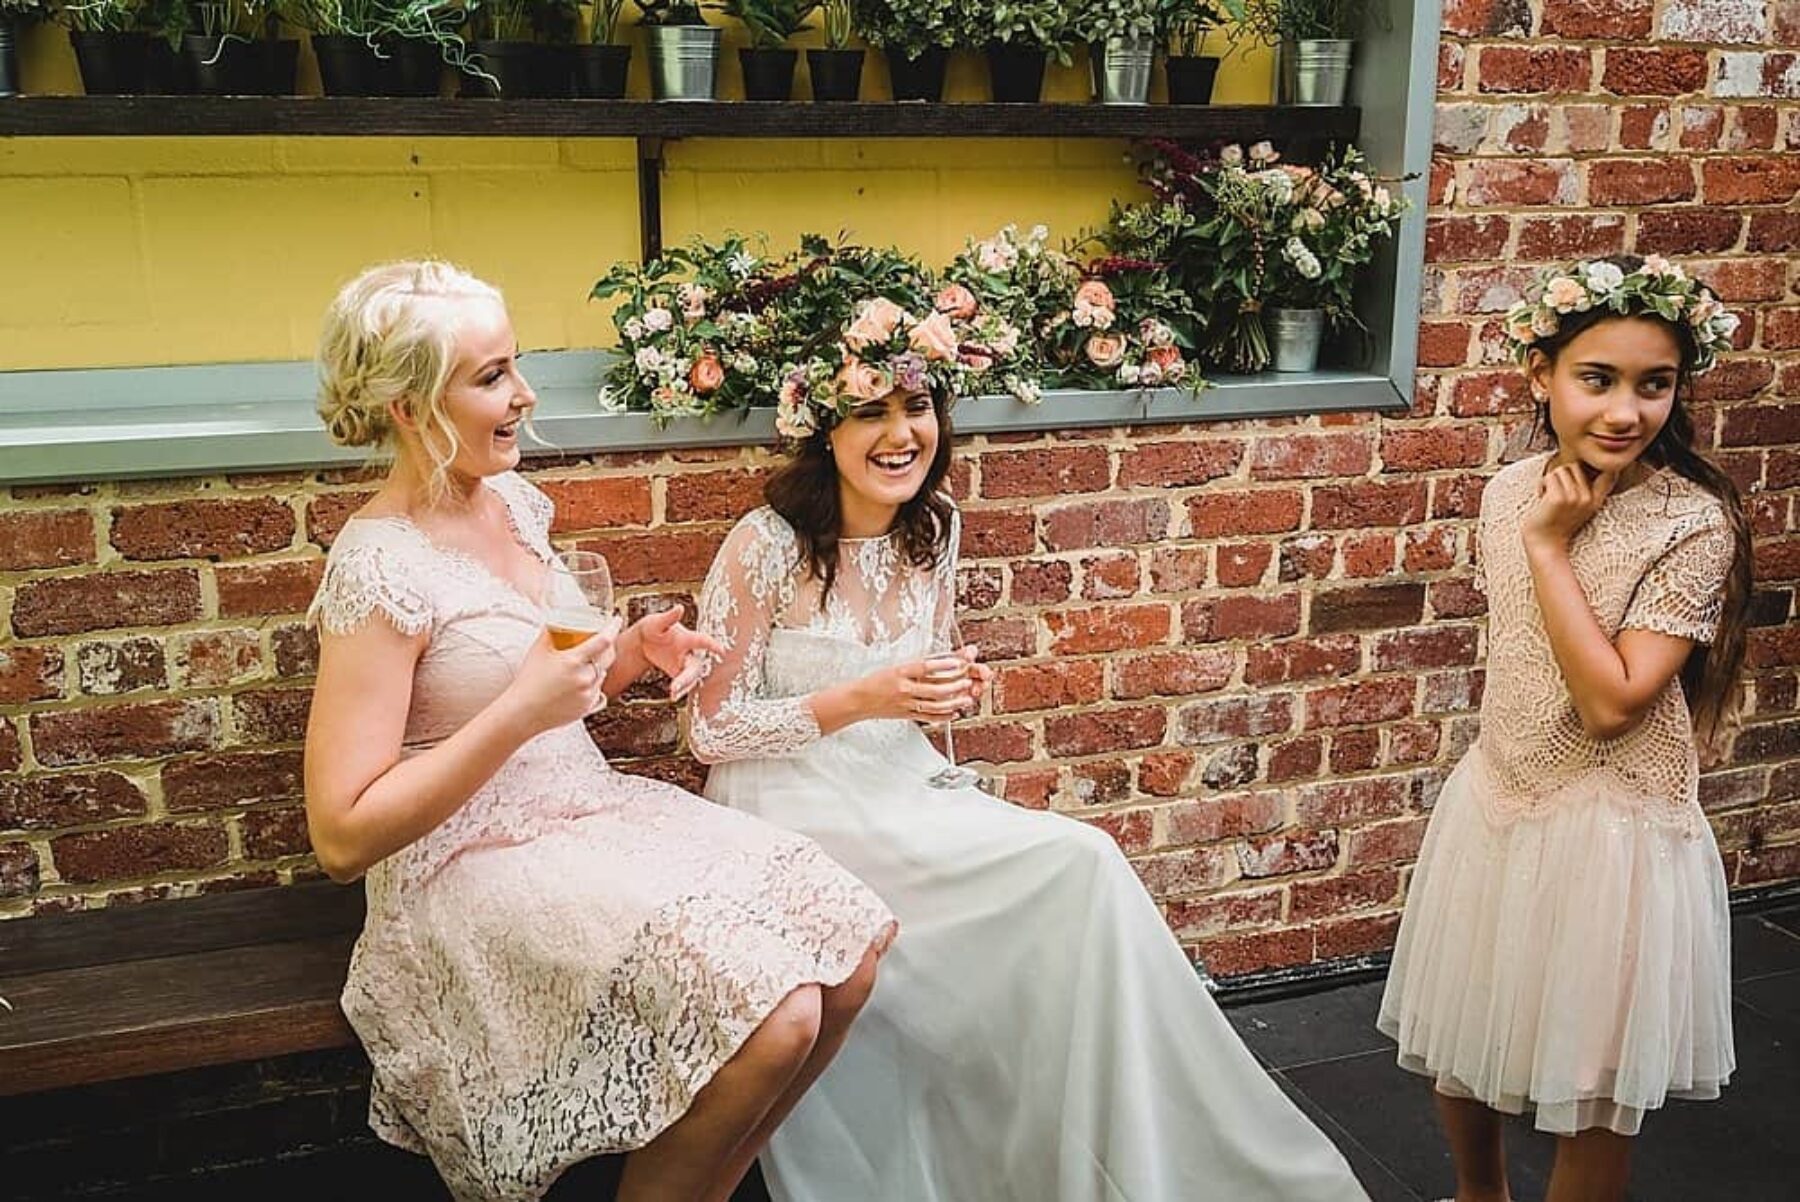 vintage/industrial wedding at The Flour Factory Perth - CJ Williams photography